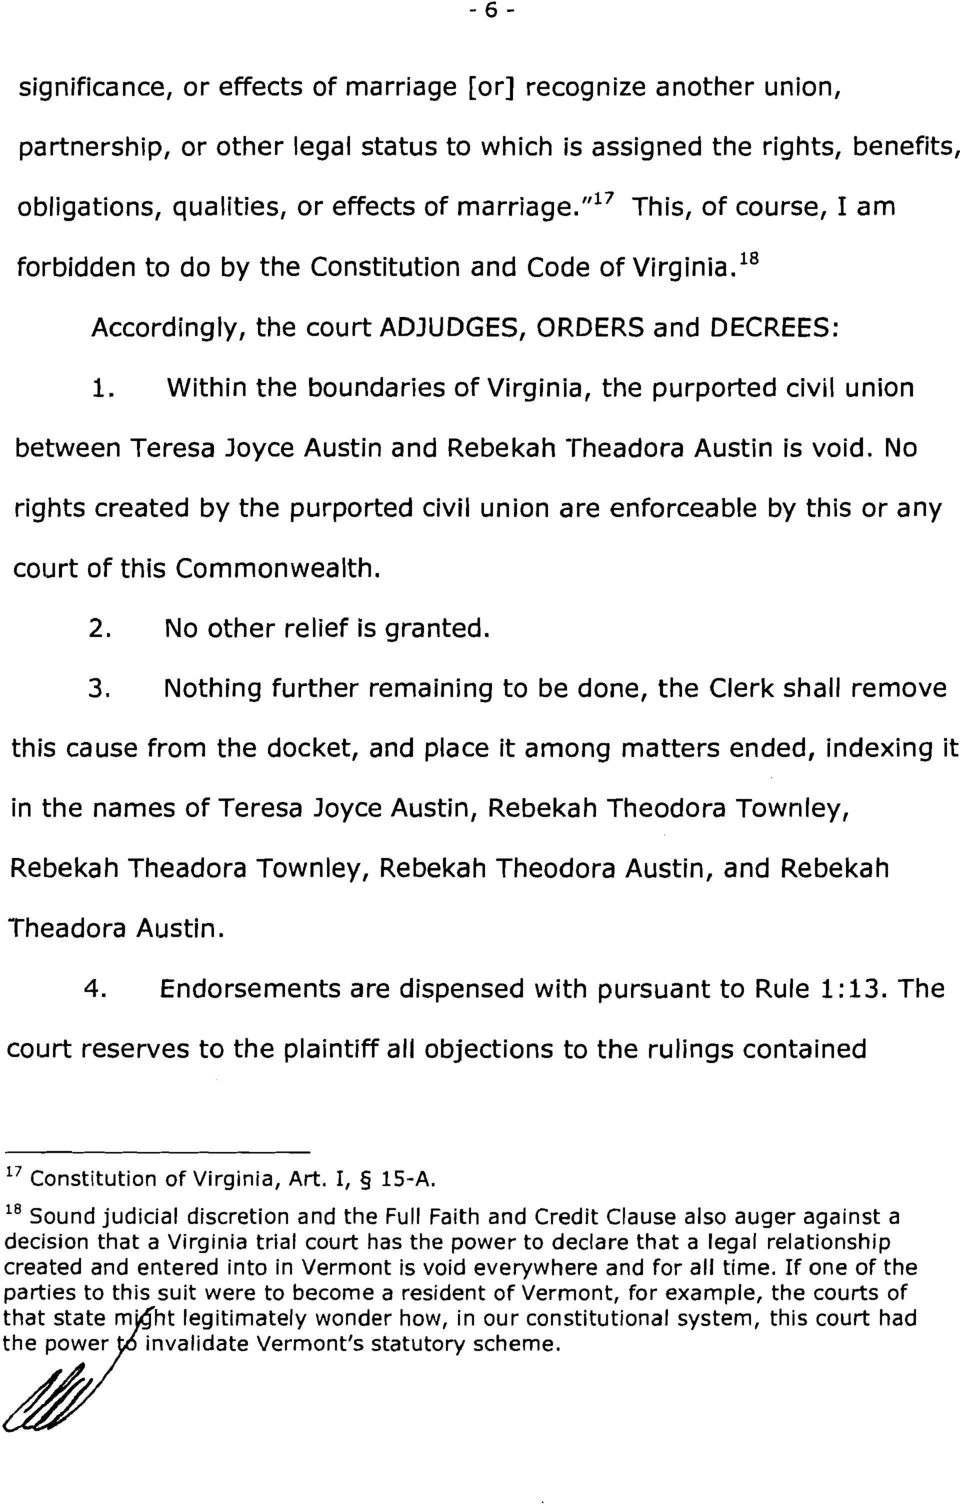 18 Accordingly, the court ADJUDGES, ORDERS and DECREES: 1 Within the boundaries of Virginia, the purported civil union between Teresa Joyce Austin and Rebekah 'Theadora Austin is void.